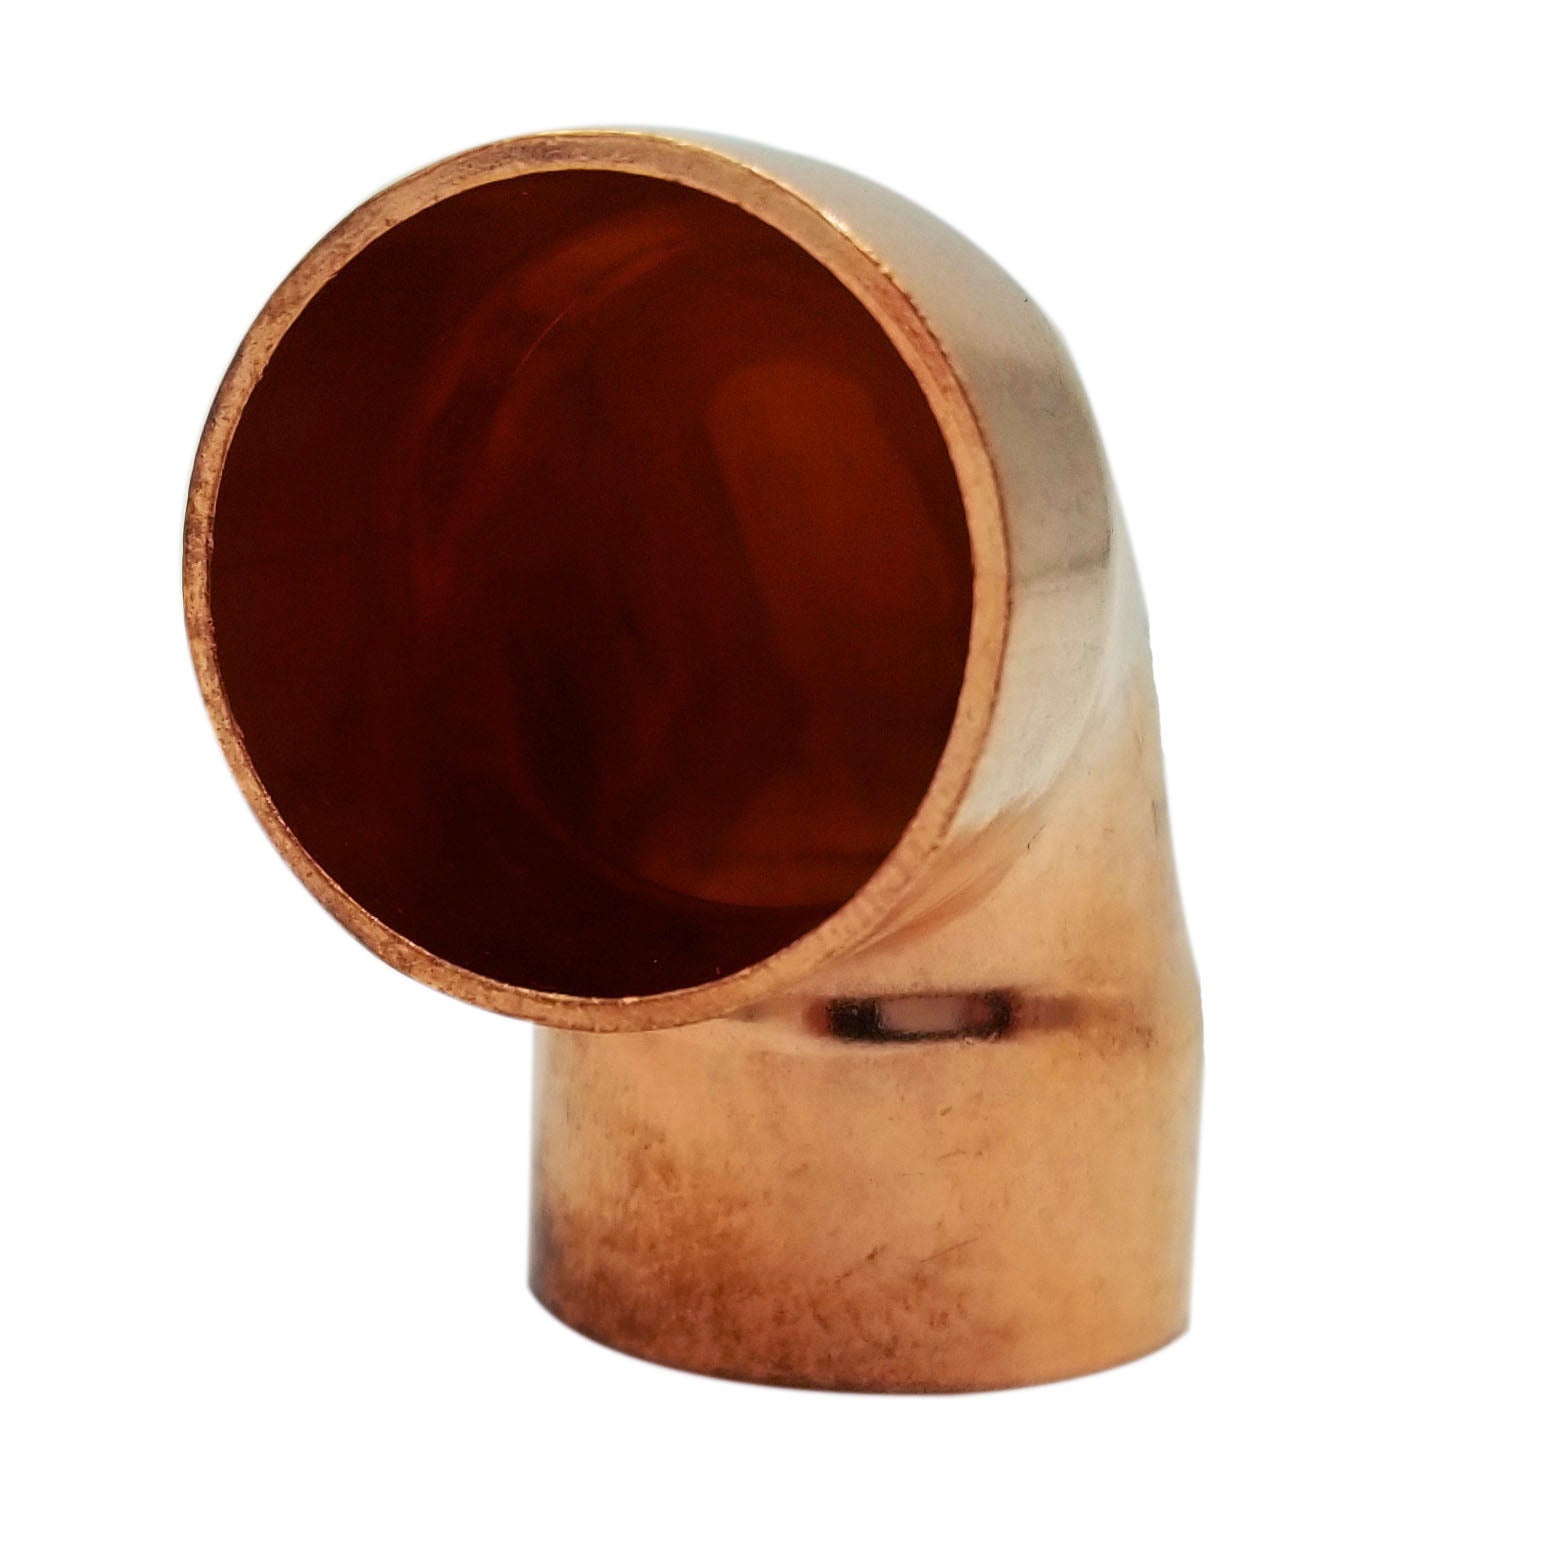 Copper Fitting 7/8 Inch (HVAC Outer Dimension) 3/4 Inch (Plumbing Inner Dimension) - Copper 90 Degree Elbow Fitting Connector - 99.9% Pure Copper - 5 Pack